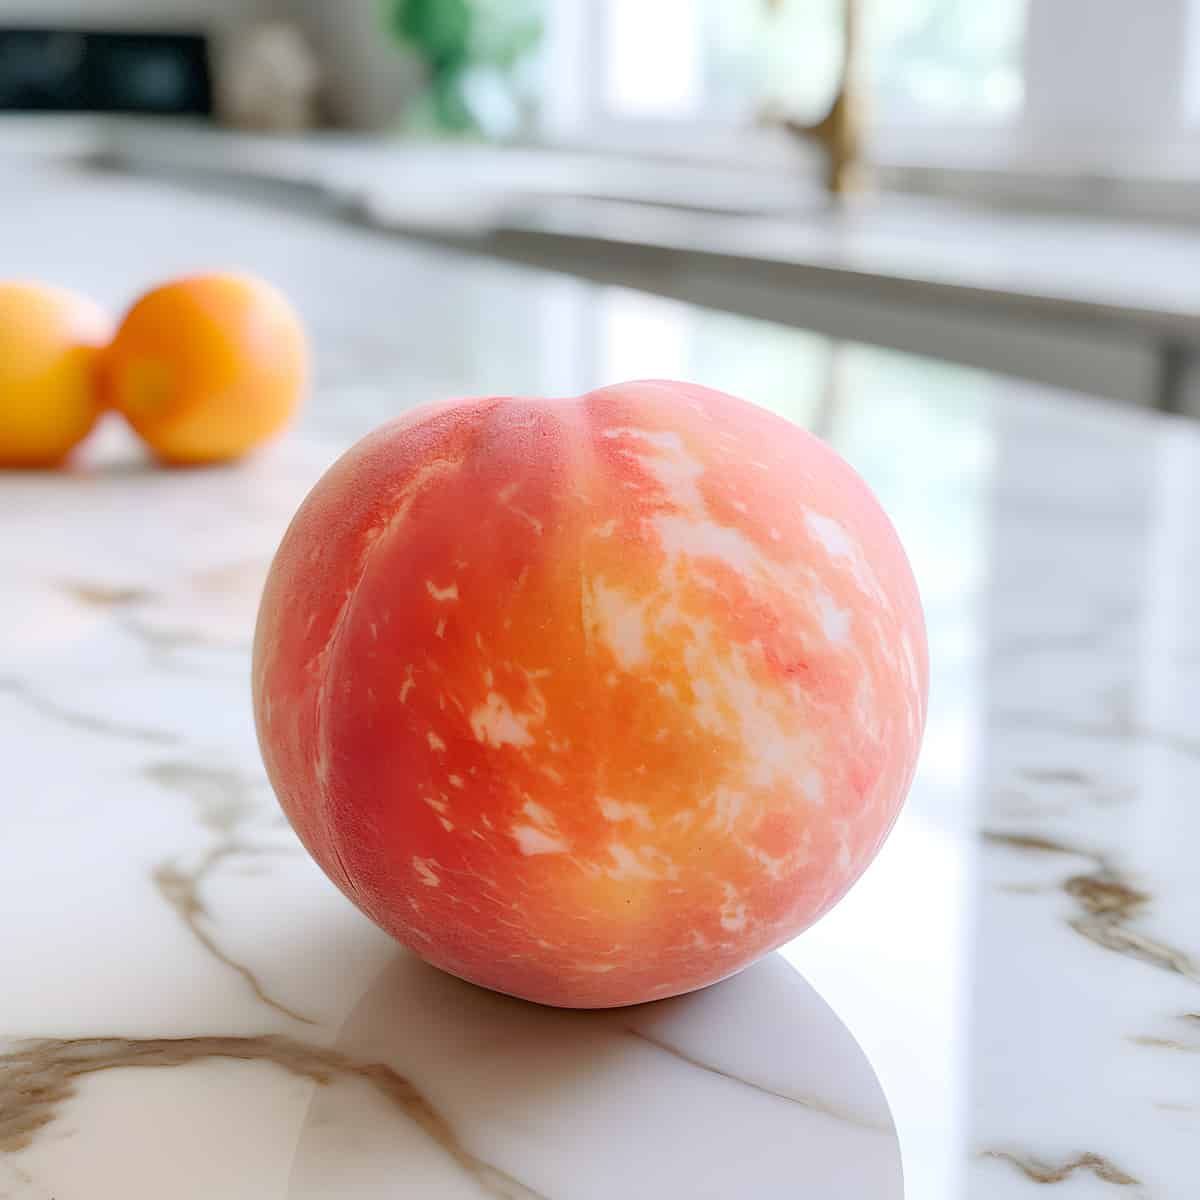 Smooth Stone Peach on a kitchen counter